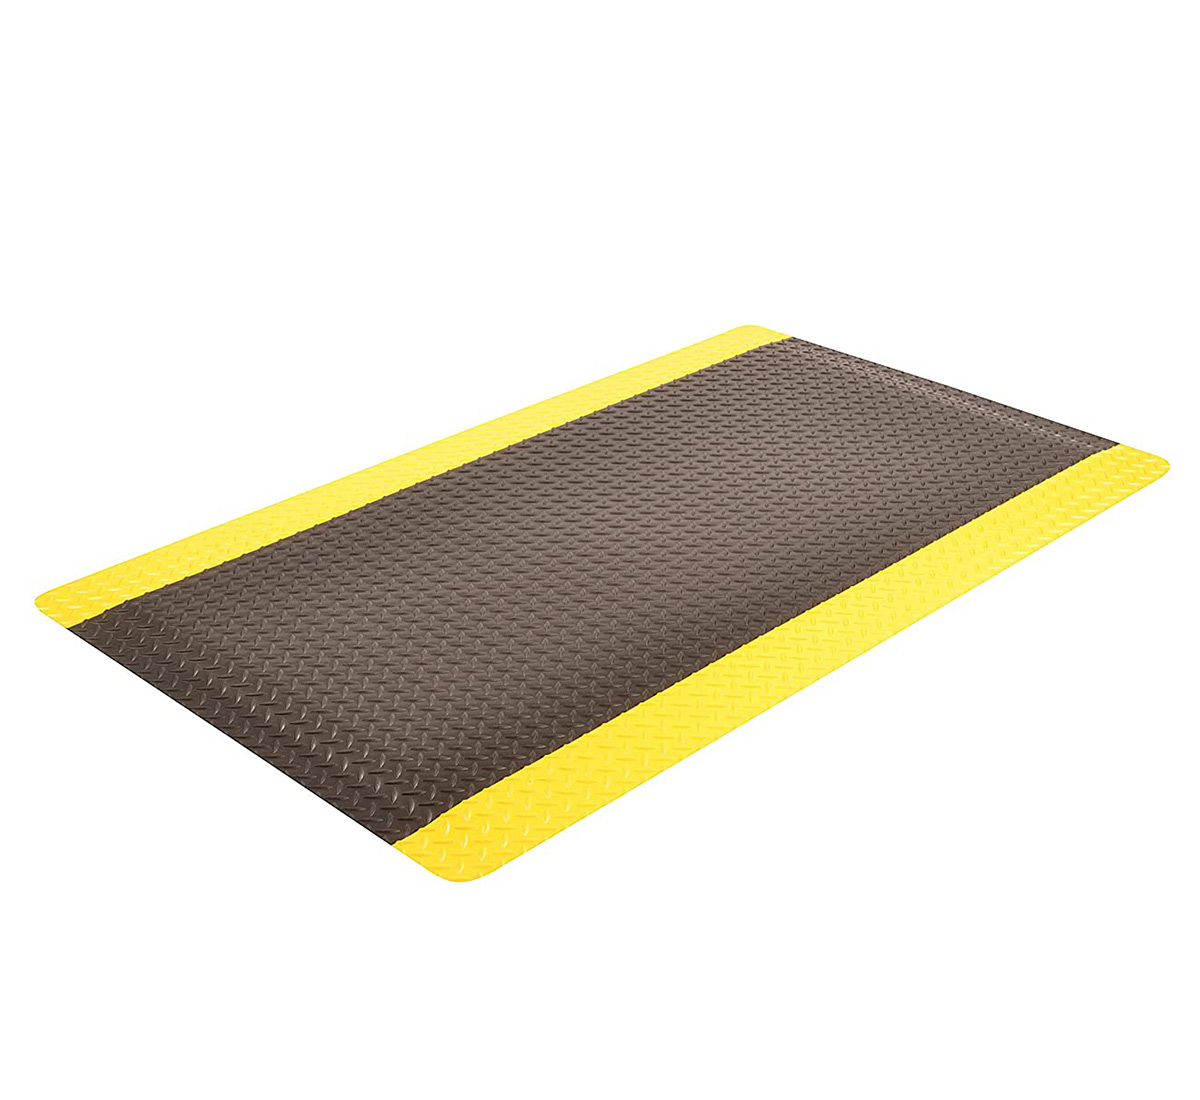 Yellow Anti Fatigue Industrial Mat With Rubber Material